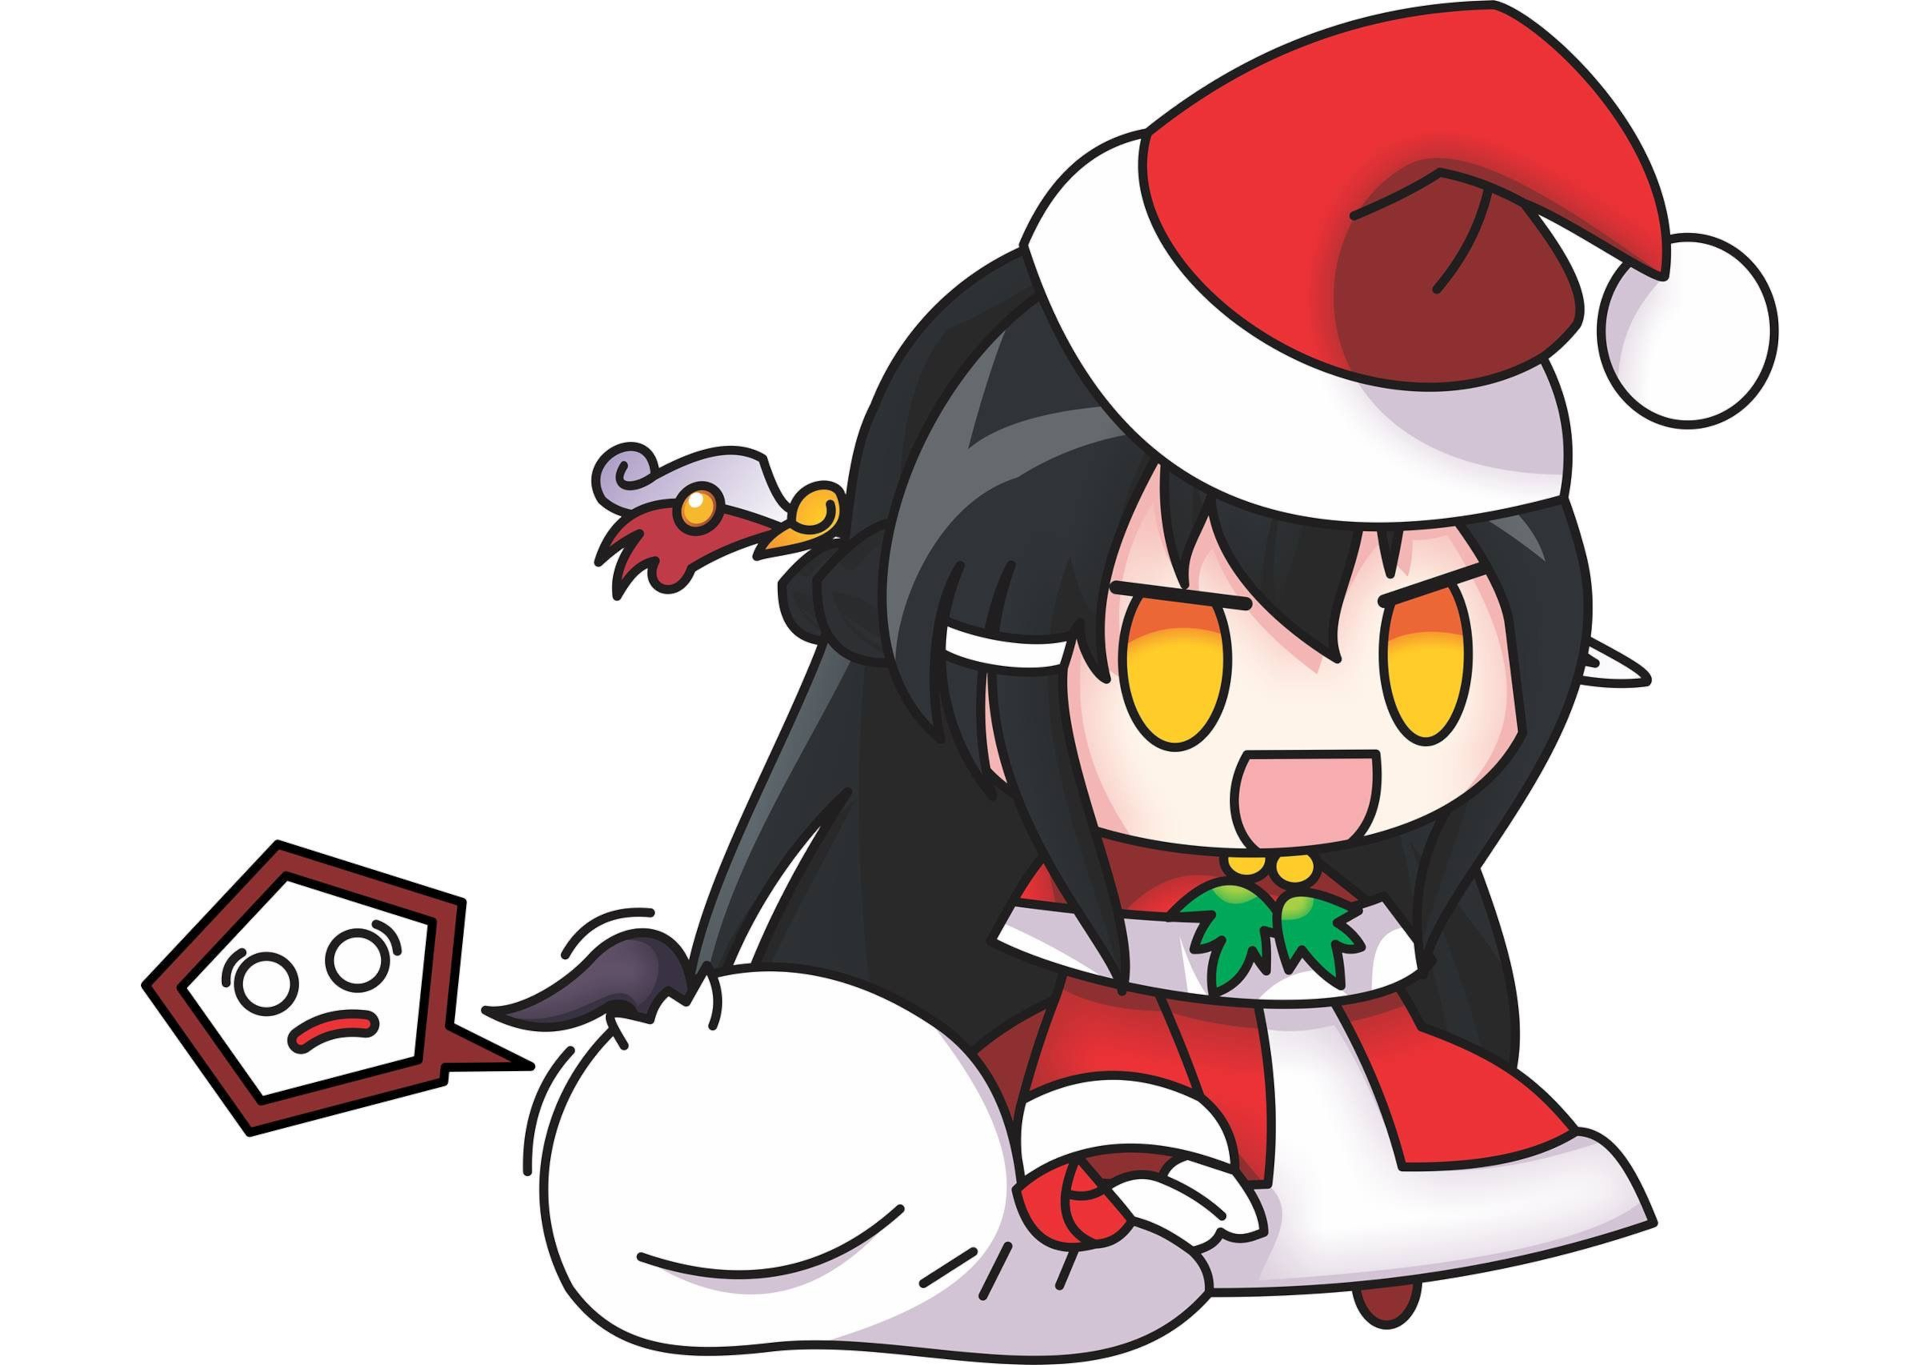 Draw your character or oc in padoru version by Saralutami | Fiverr